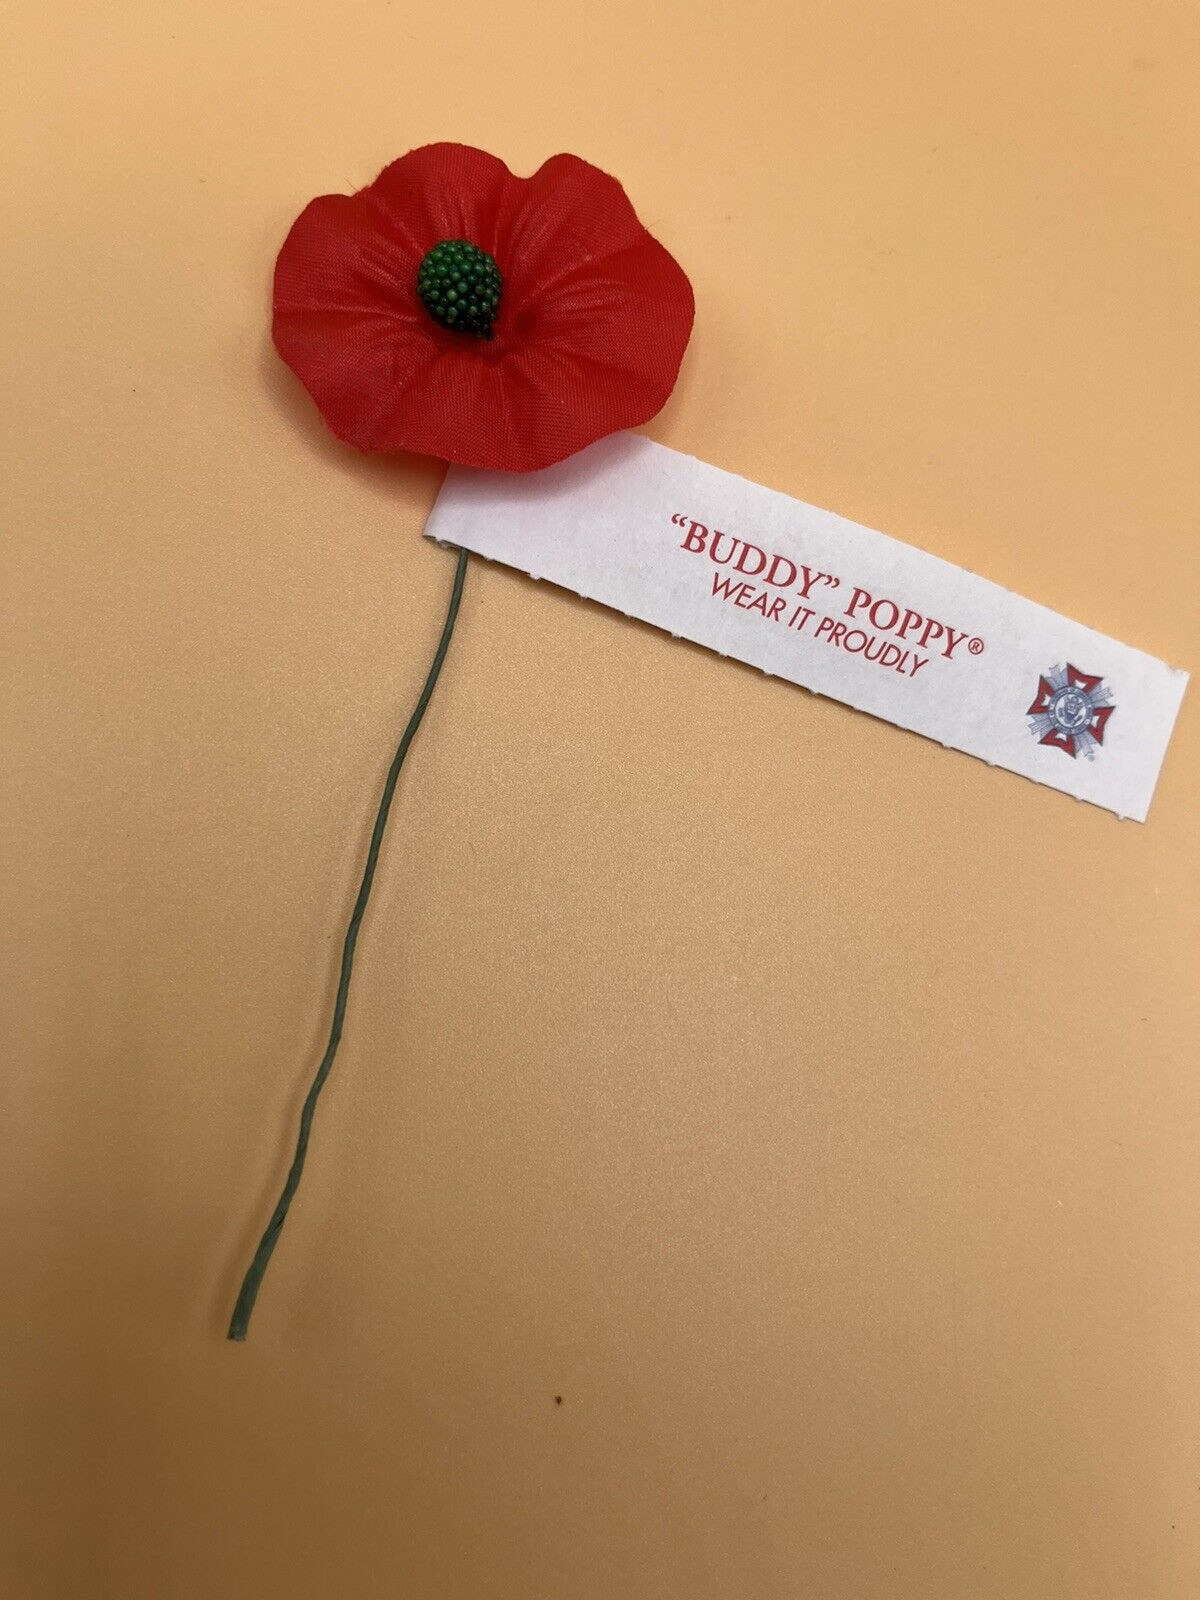 Vintage Buddy Poppy “Wear it Proudly” U.S. Veterans of Foreign Wars NOS